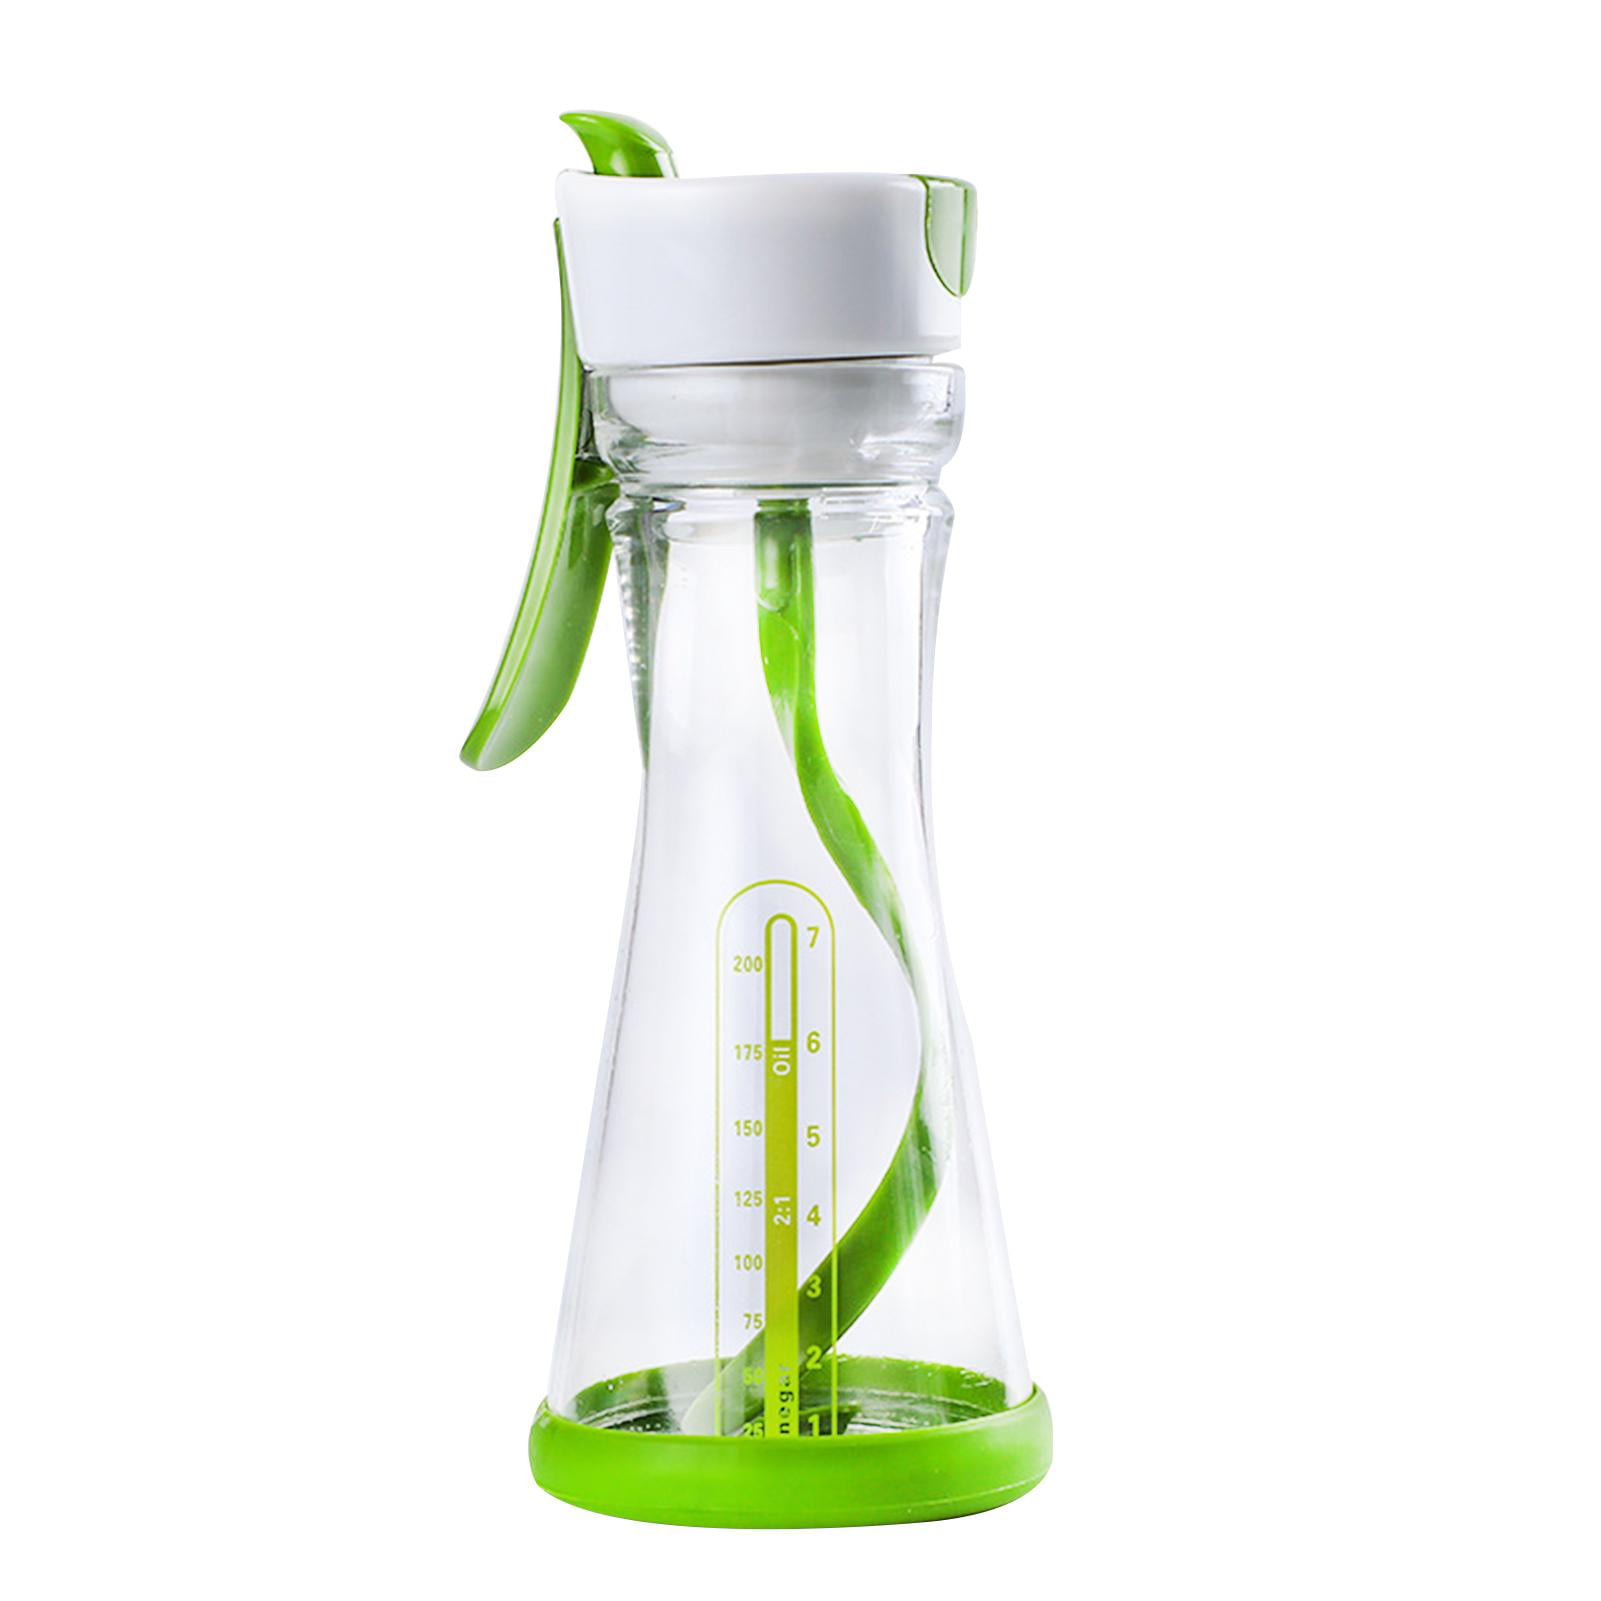 Salad Dressing Mixer Salad Dressing Shaker Manual Salad Dressing Bottles Mixing Container With The Pump Handle Stirring Bottle Salad Mixing Cup For Sauce Oil And Vinaigrettes 